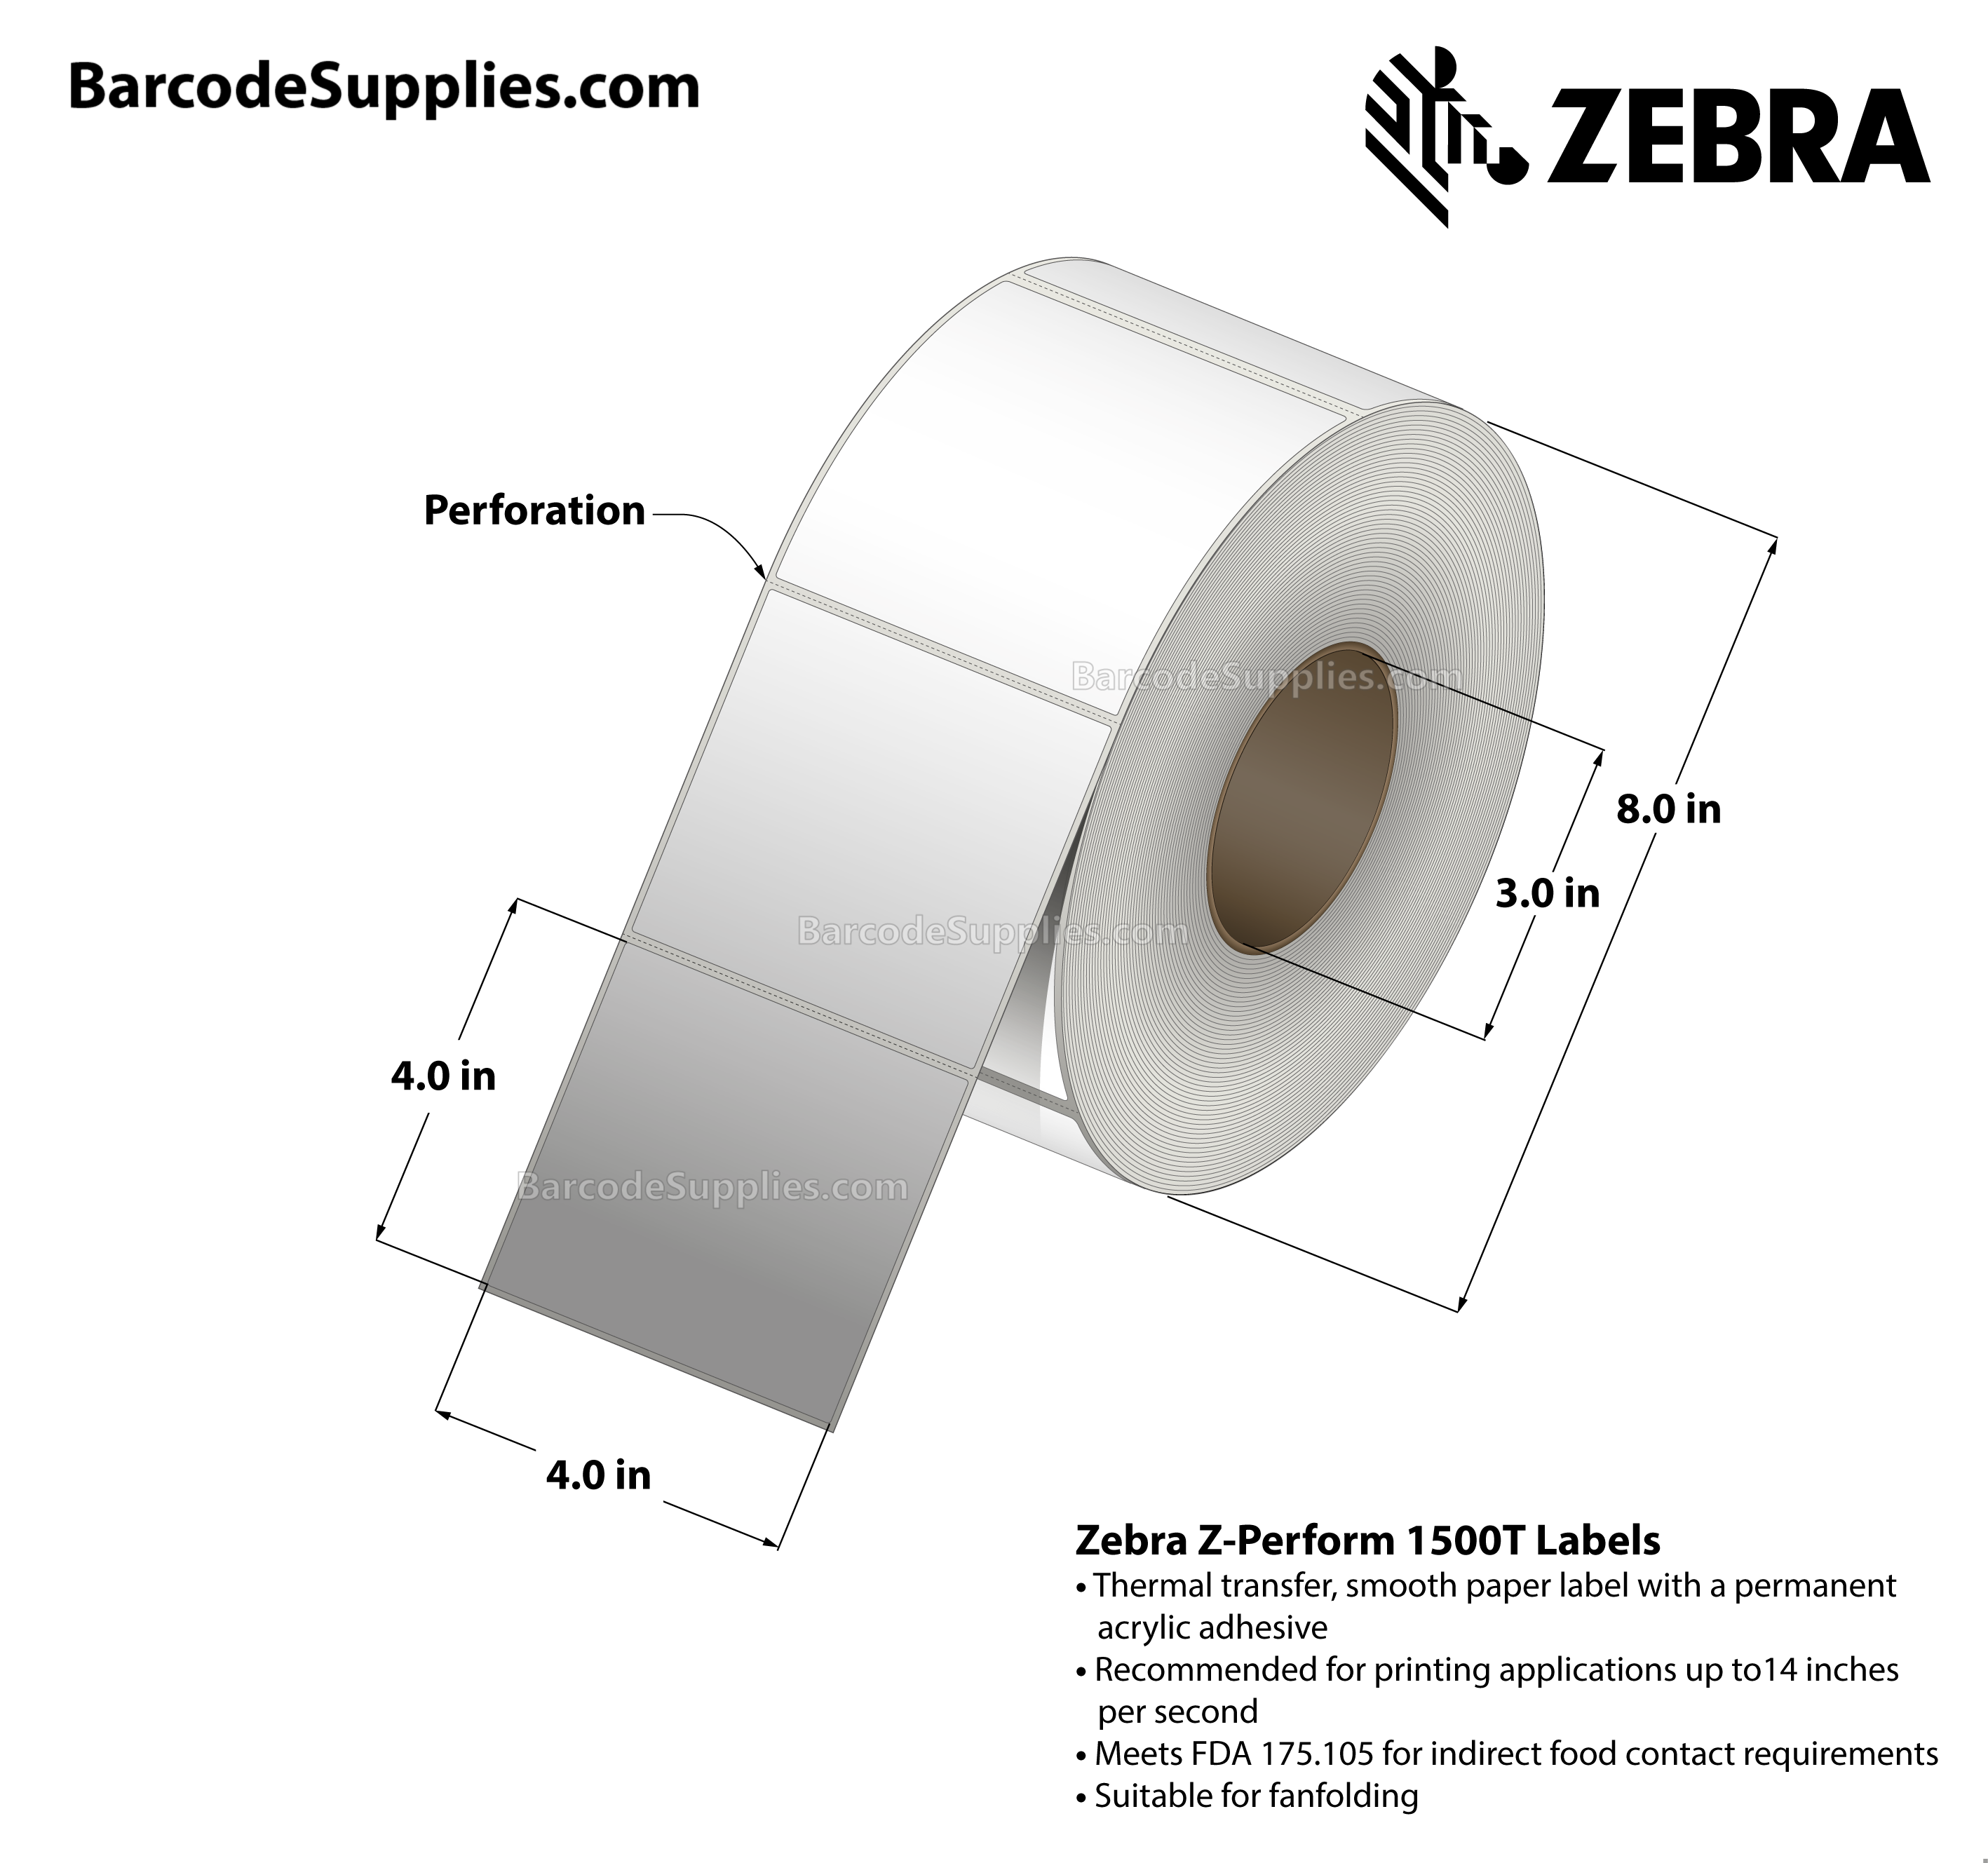 4 x 4 Thermal Transfer White Z-Perform 1500T Labels With Permanent Adhesive - Perforated - 1500 Labels Per Roll - Carton Of 4 Rolls - 6000 Labels Total - MPN: 10021230